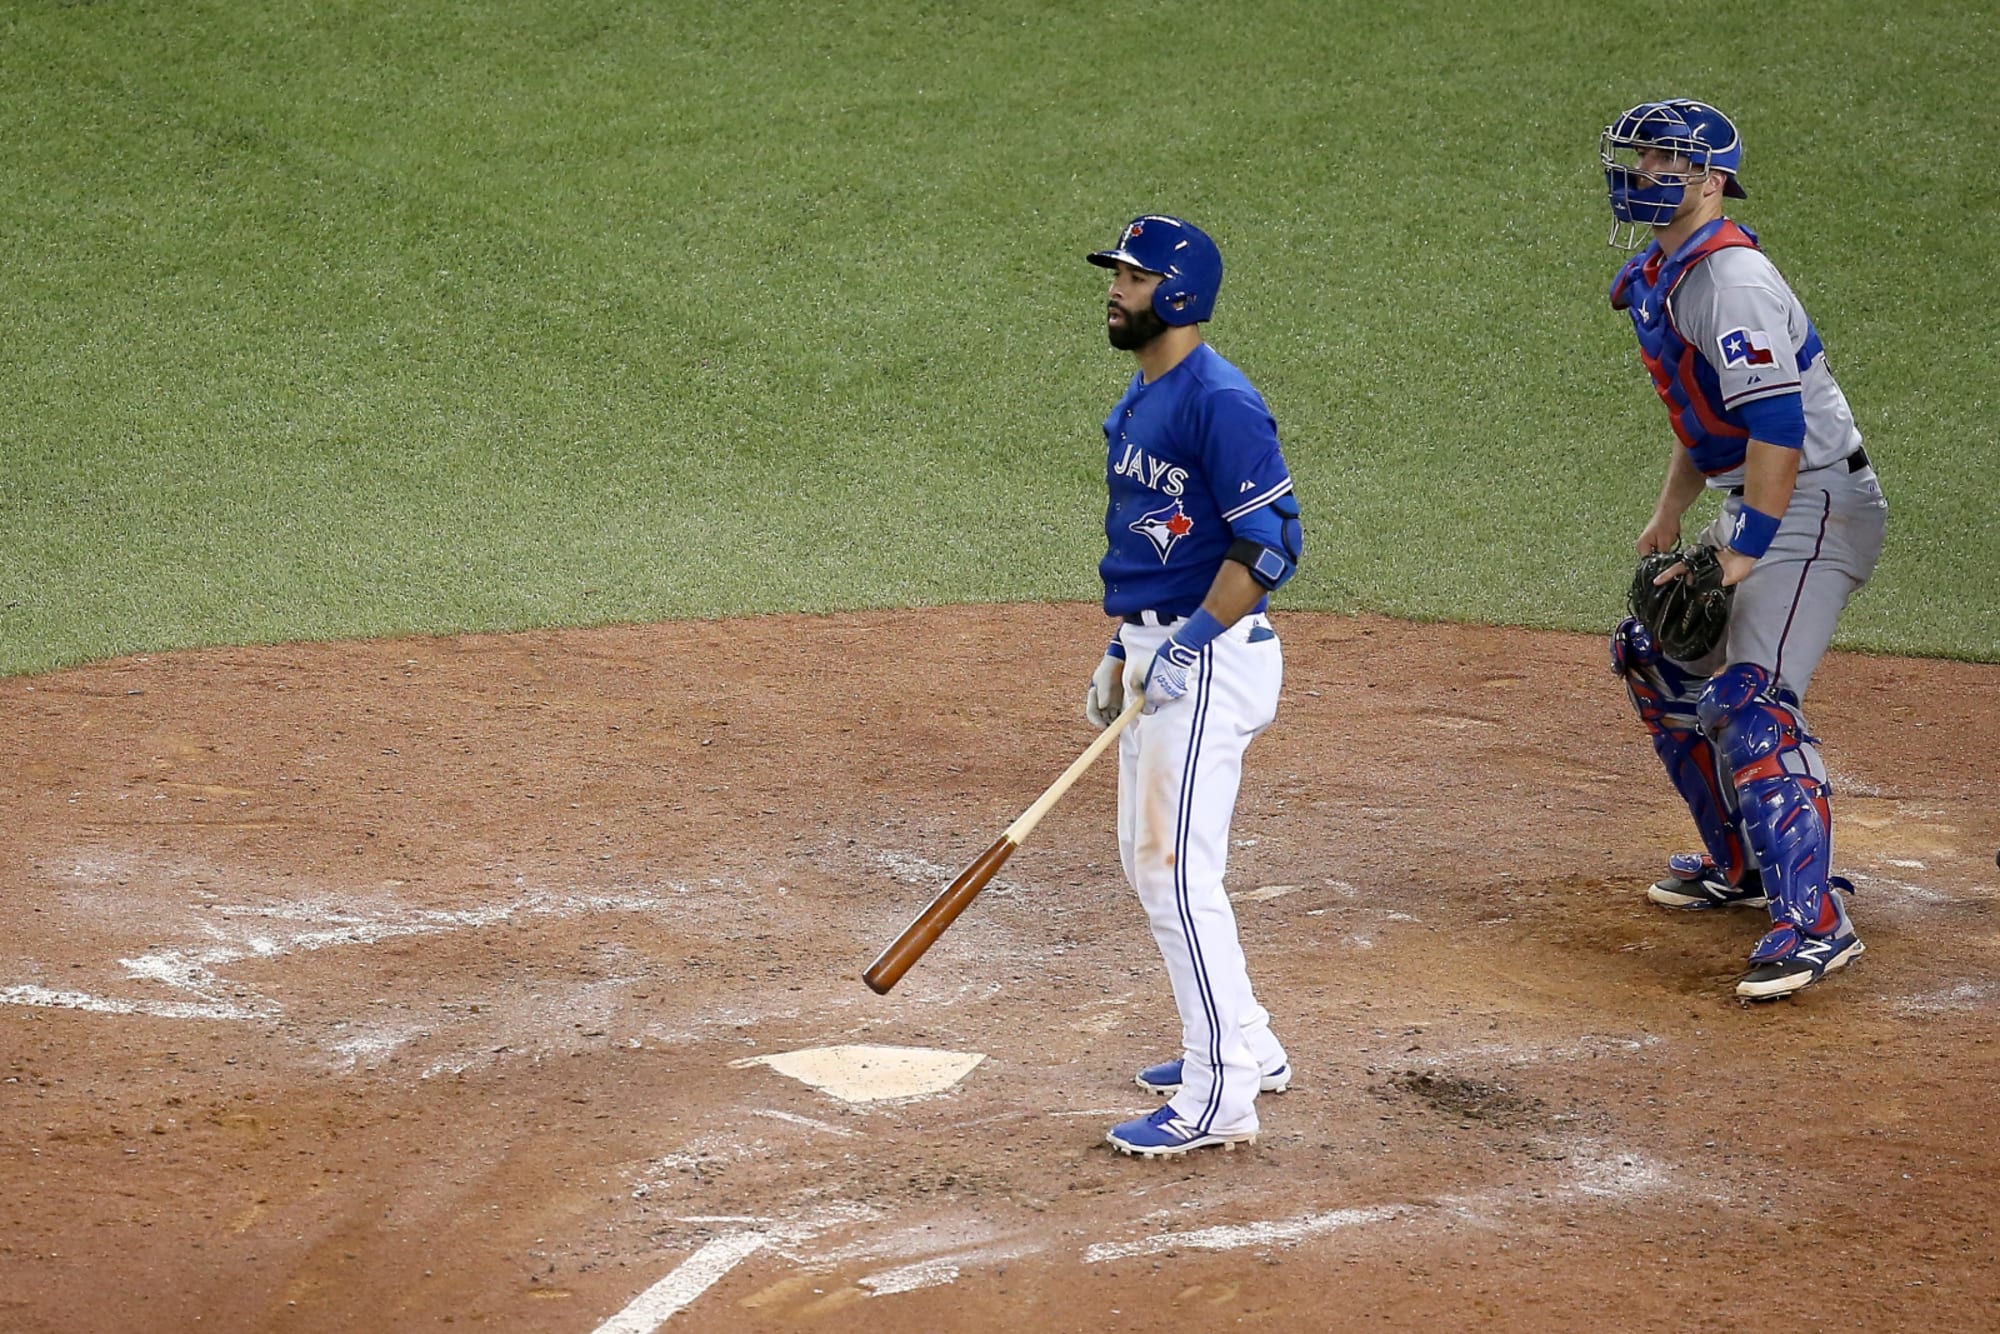 American League's Jose Bautista of the Toronto Blue Jays watches